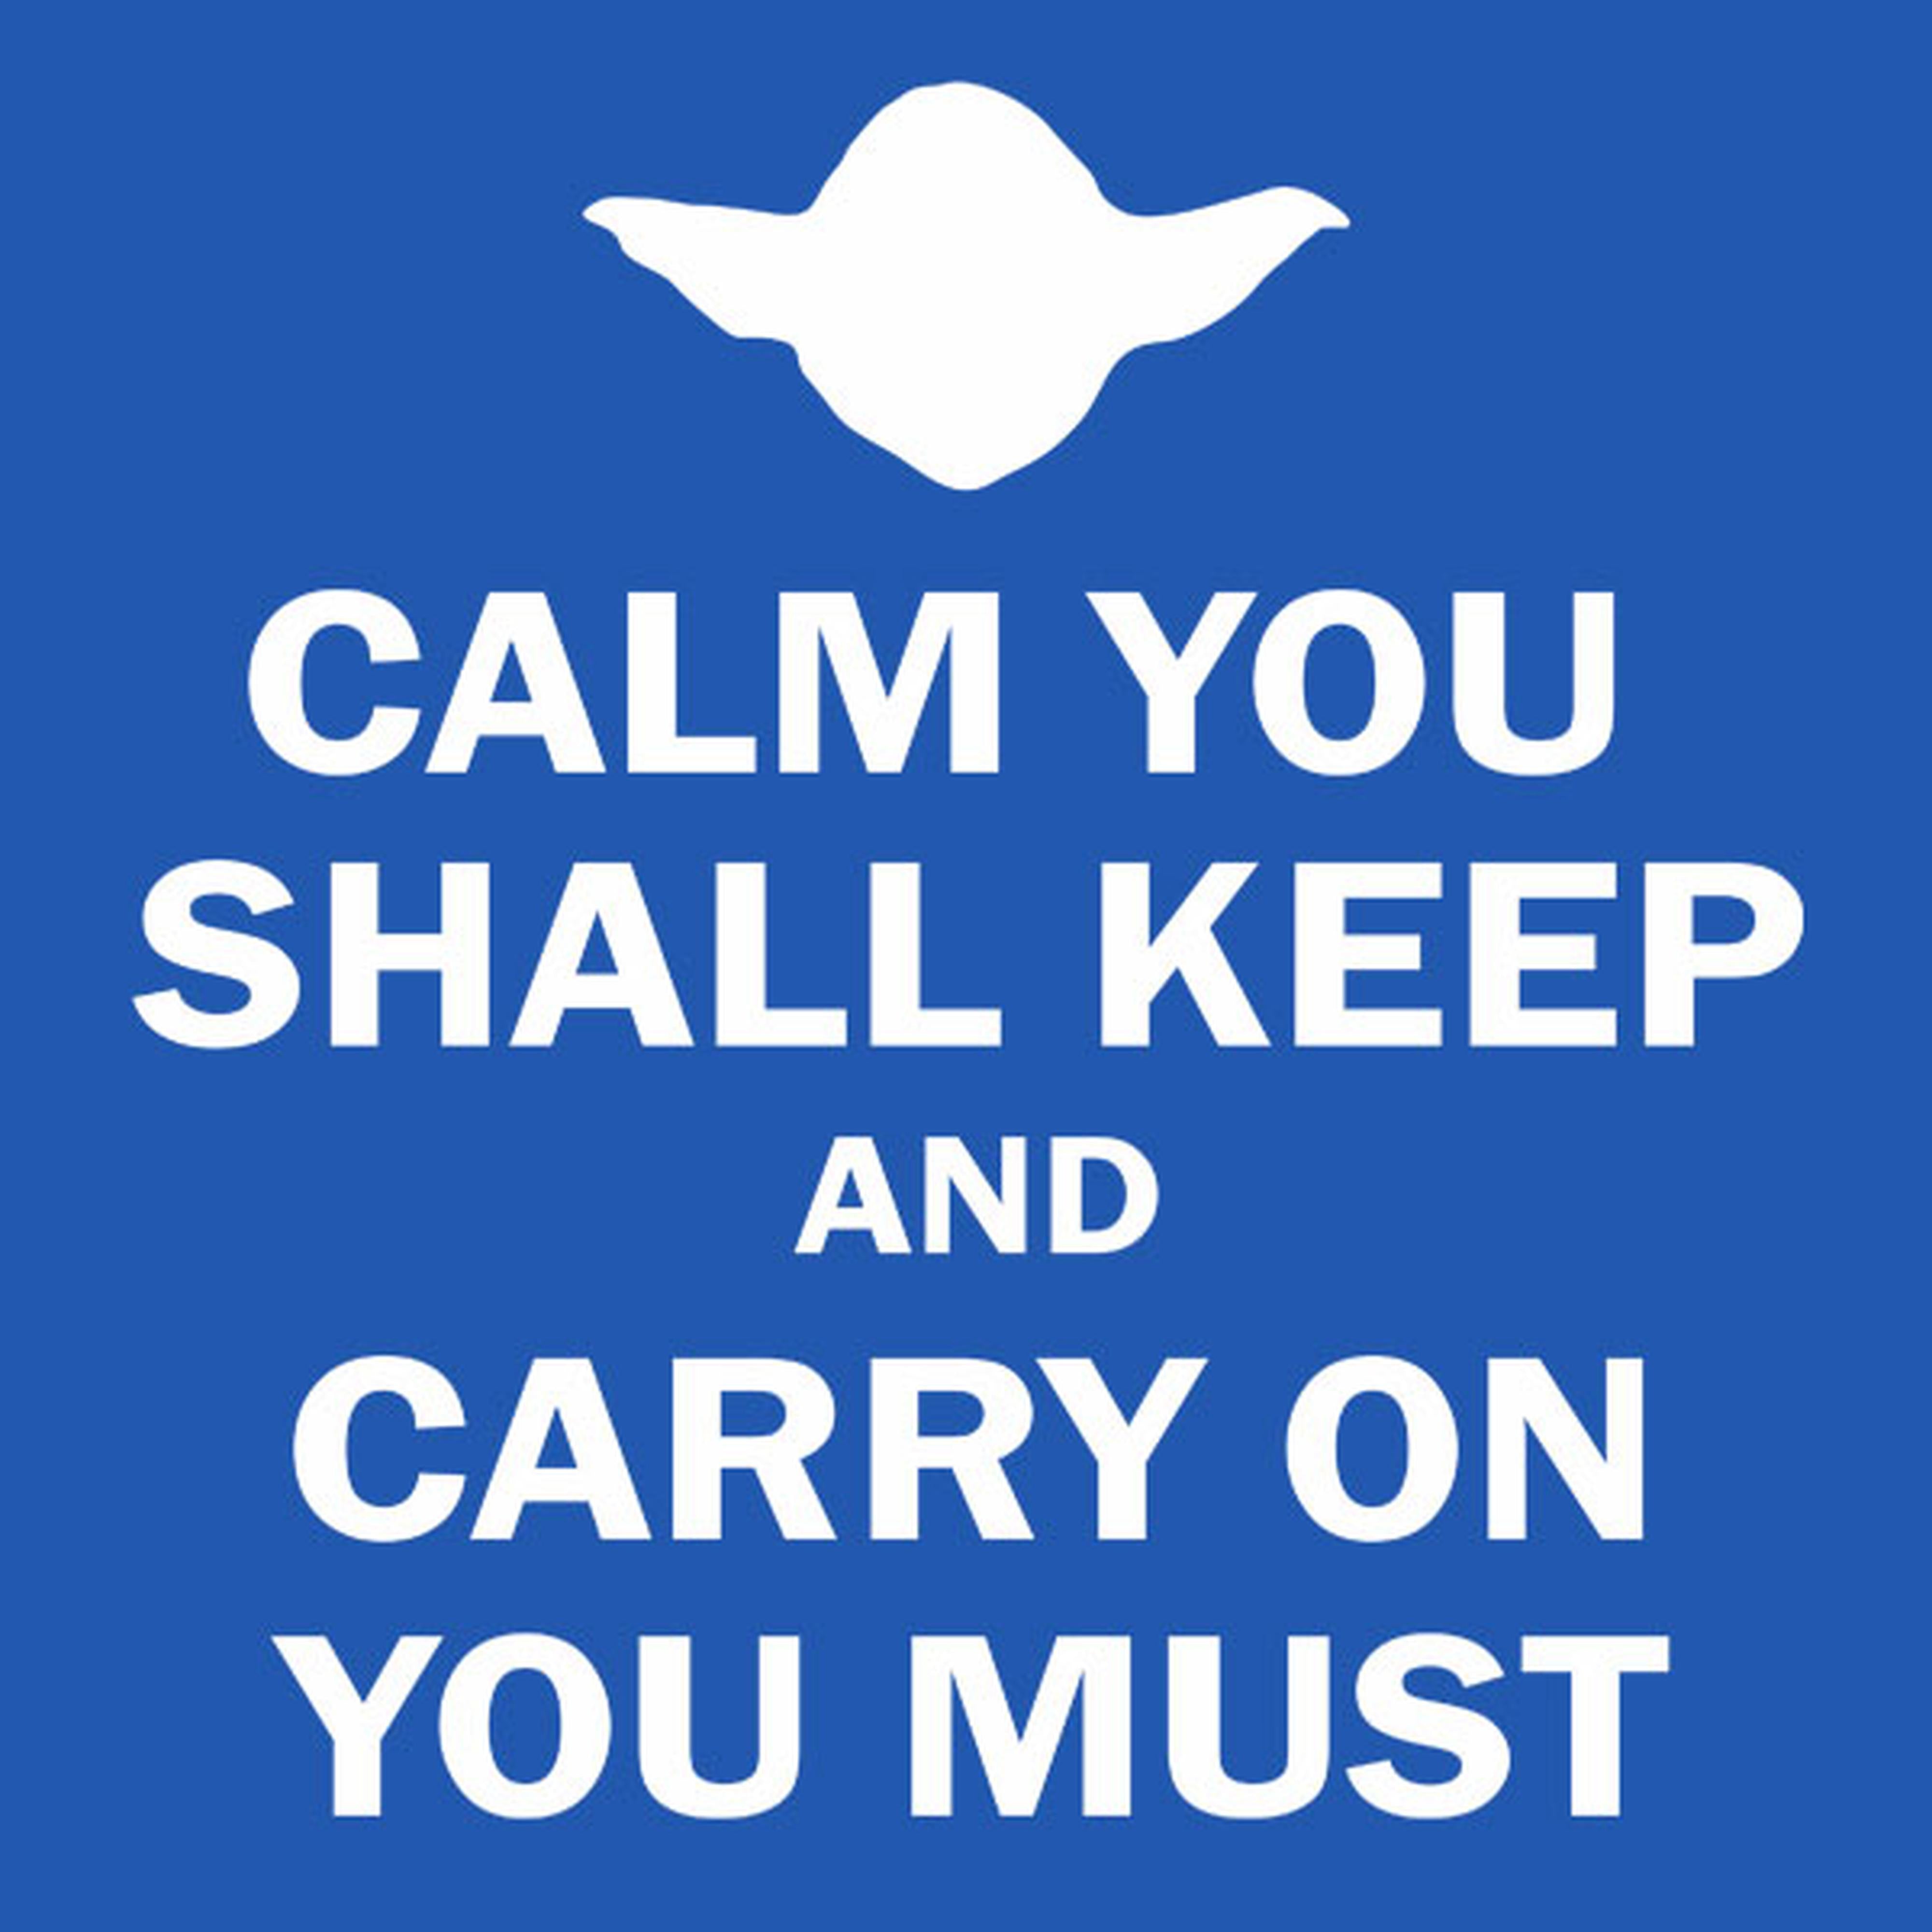 Calm you shall keep and carry on you must - T-shirt